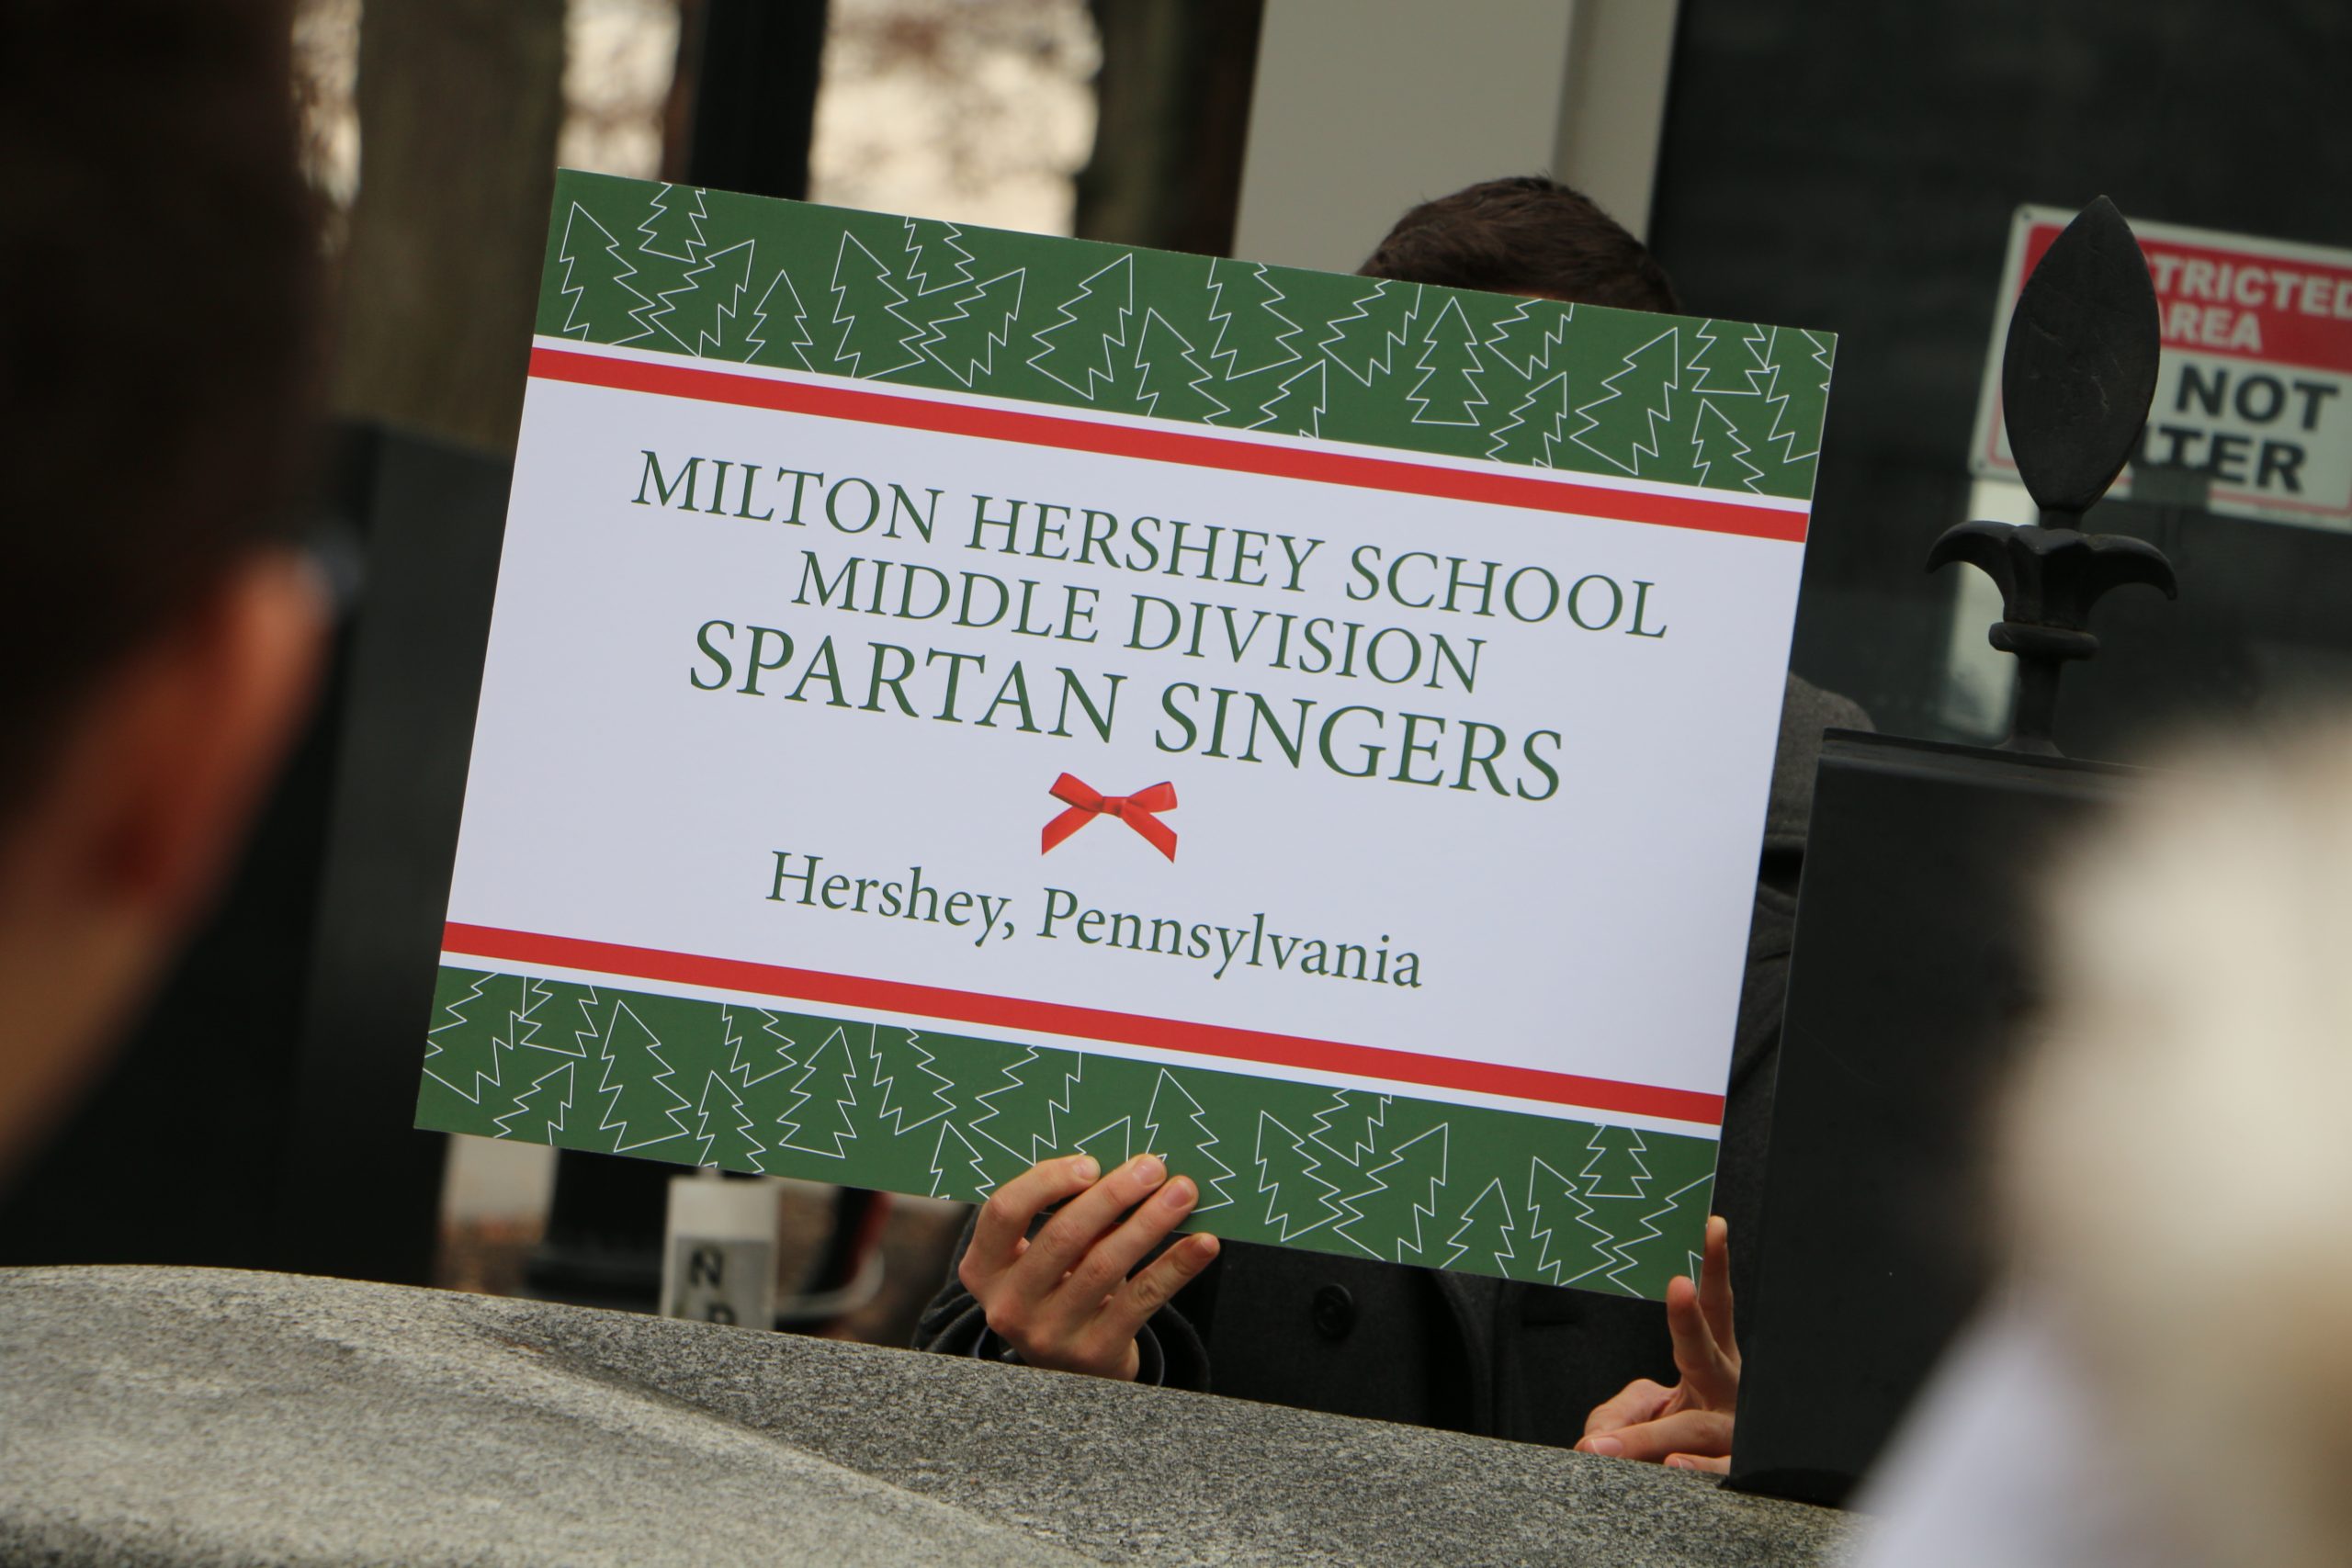 Milton Hershey School middle division spartan singers from Hershey, PA